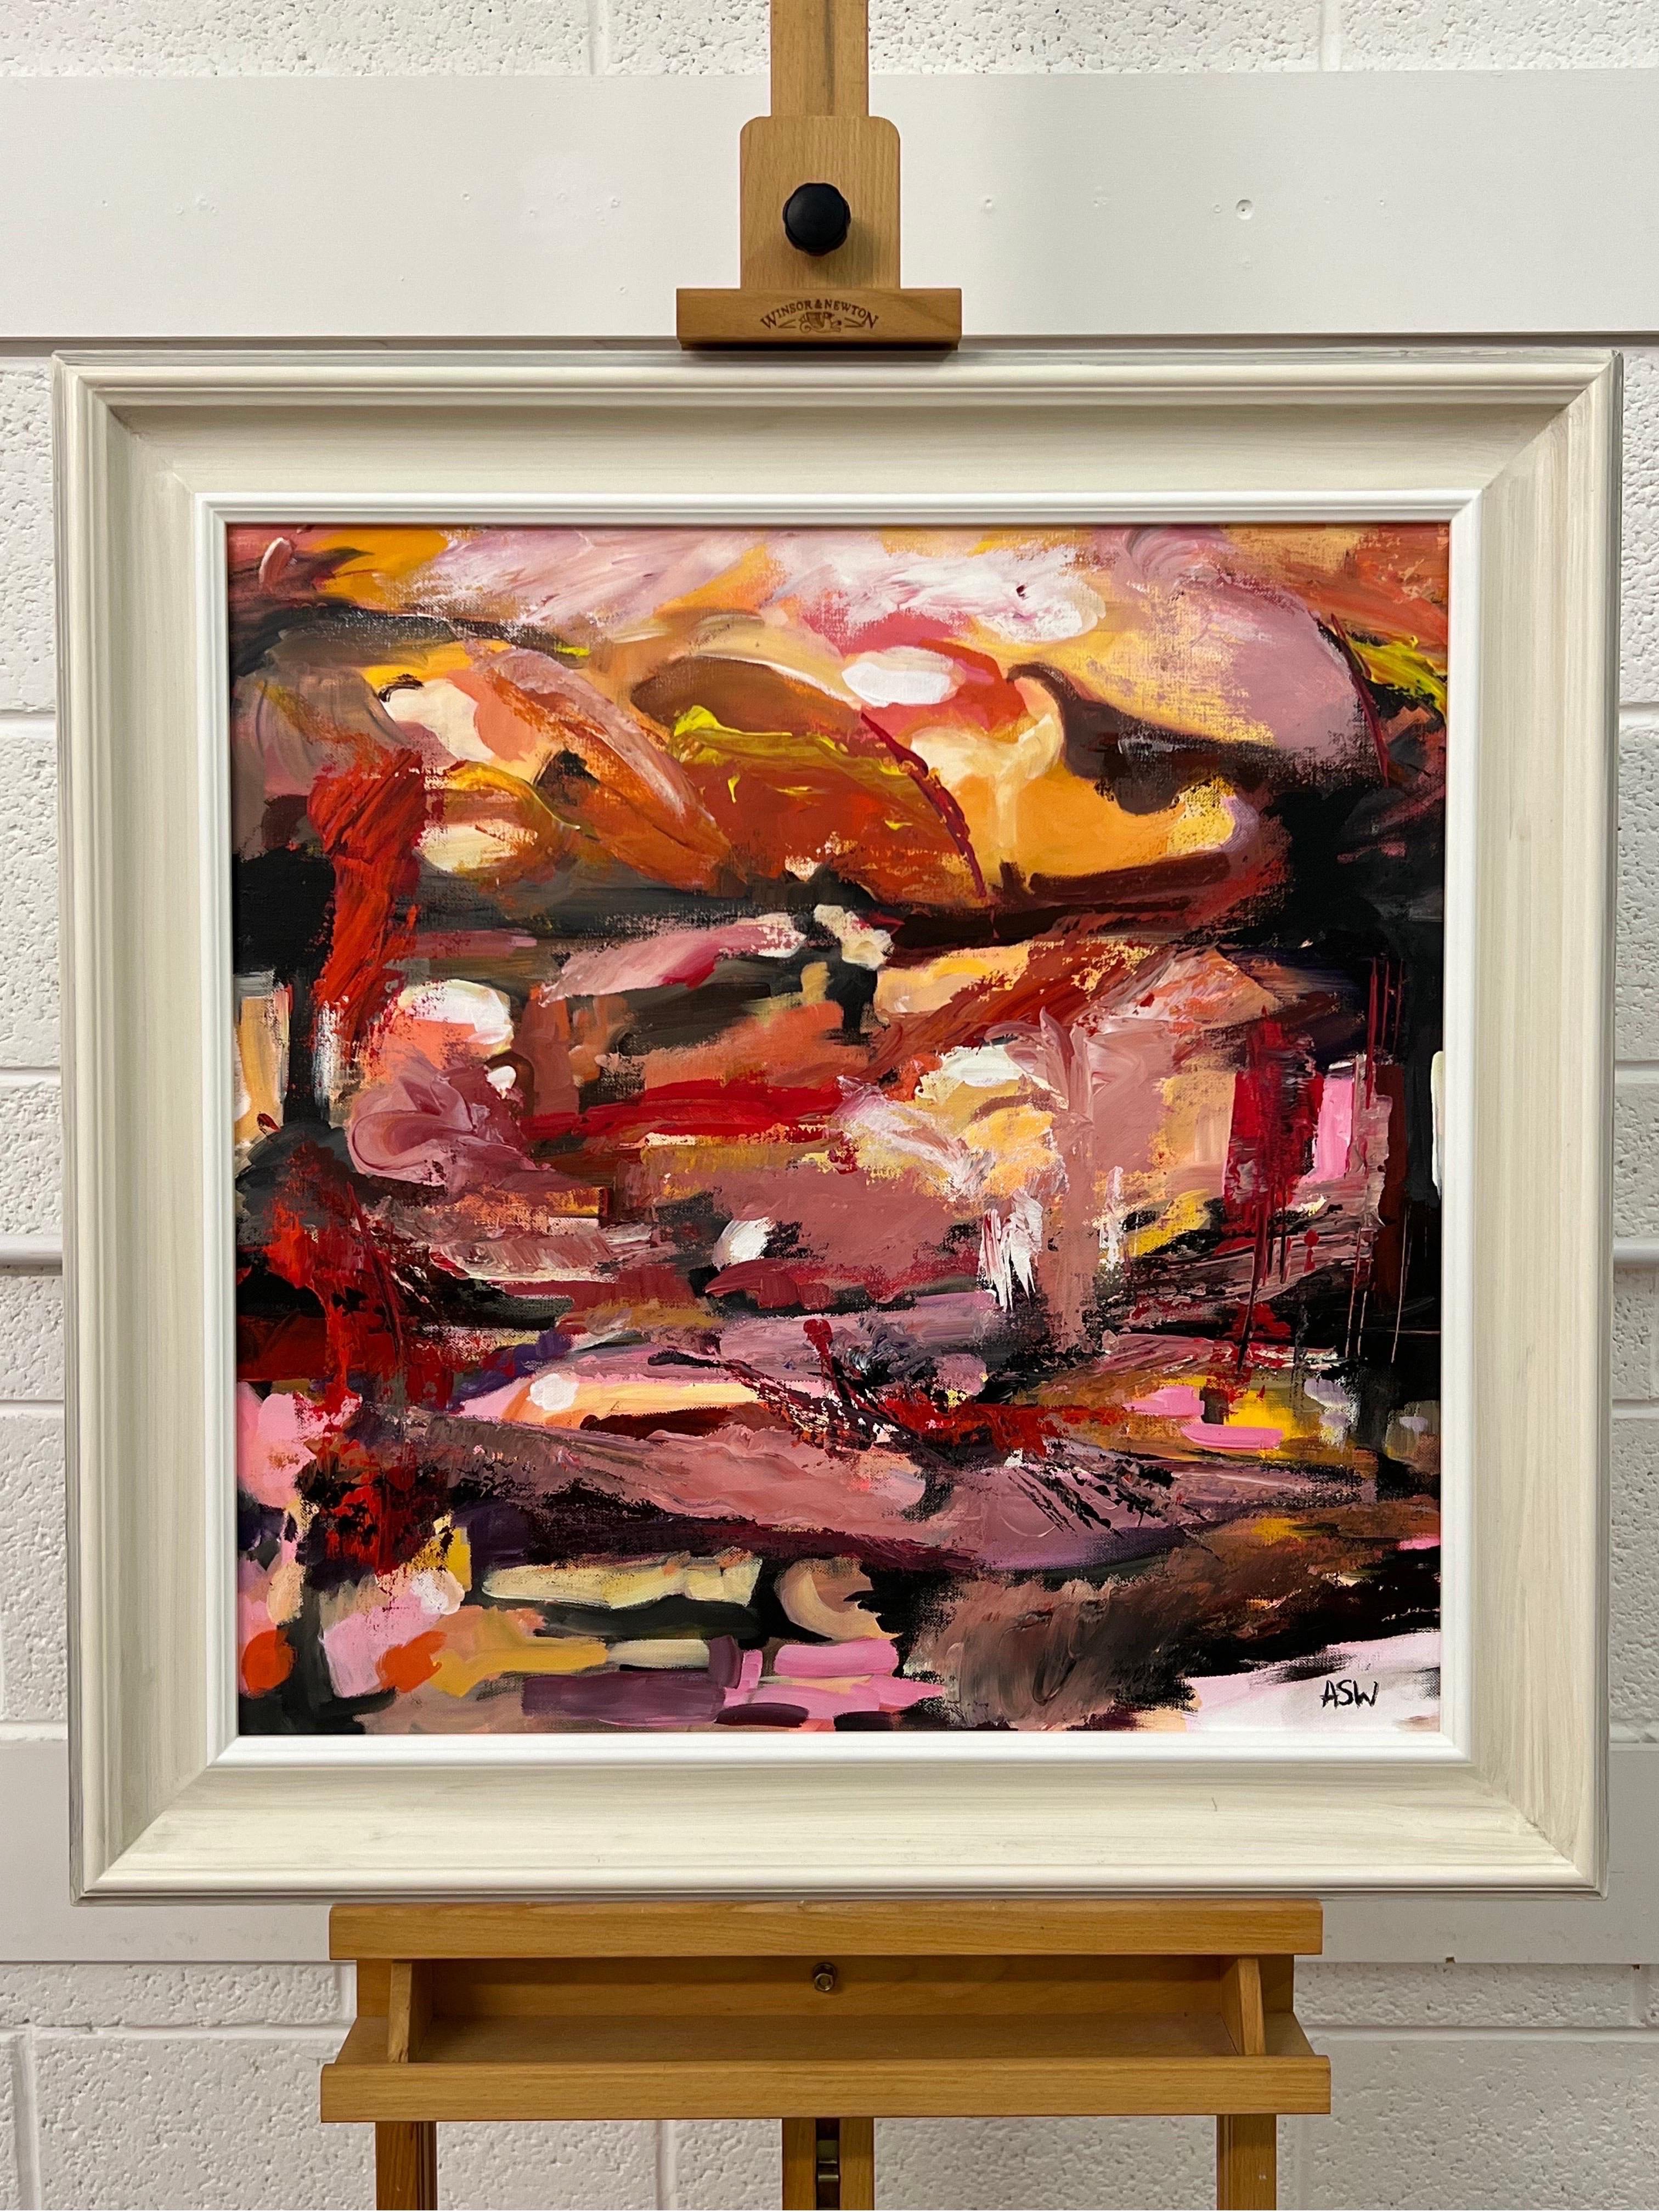 Abstract Expressionist Painting by Contemporary British Artist, Angela Wakefield, using rich pink, red, orange and black. 

Art measures 24 x 24 inches
Frame measures 29 x 29 inches

Angela Wakefield has twice been on the front cover of ‘Art of